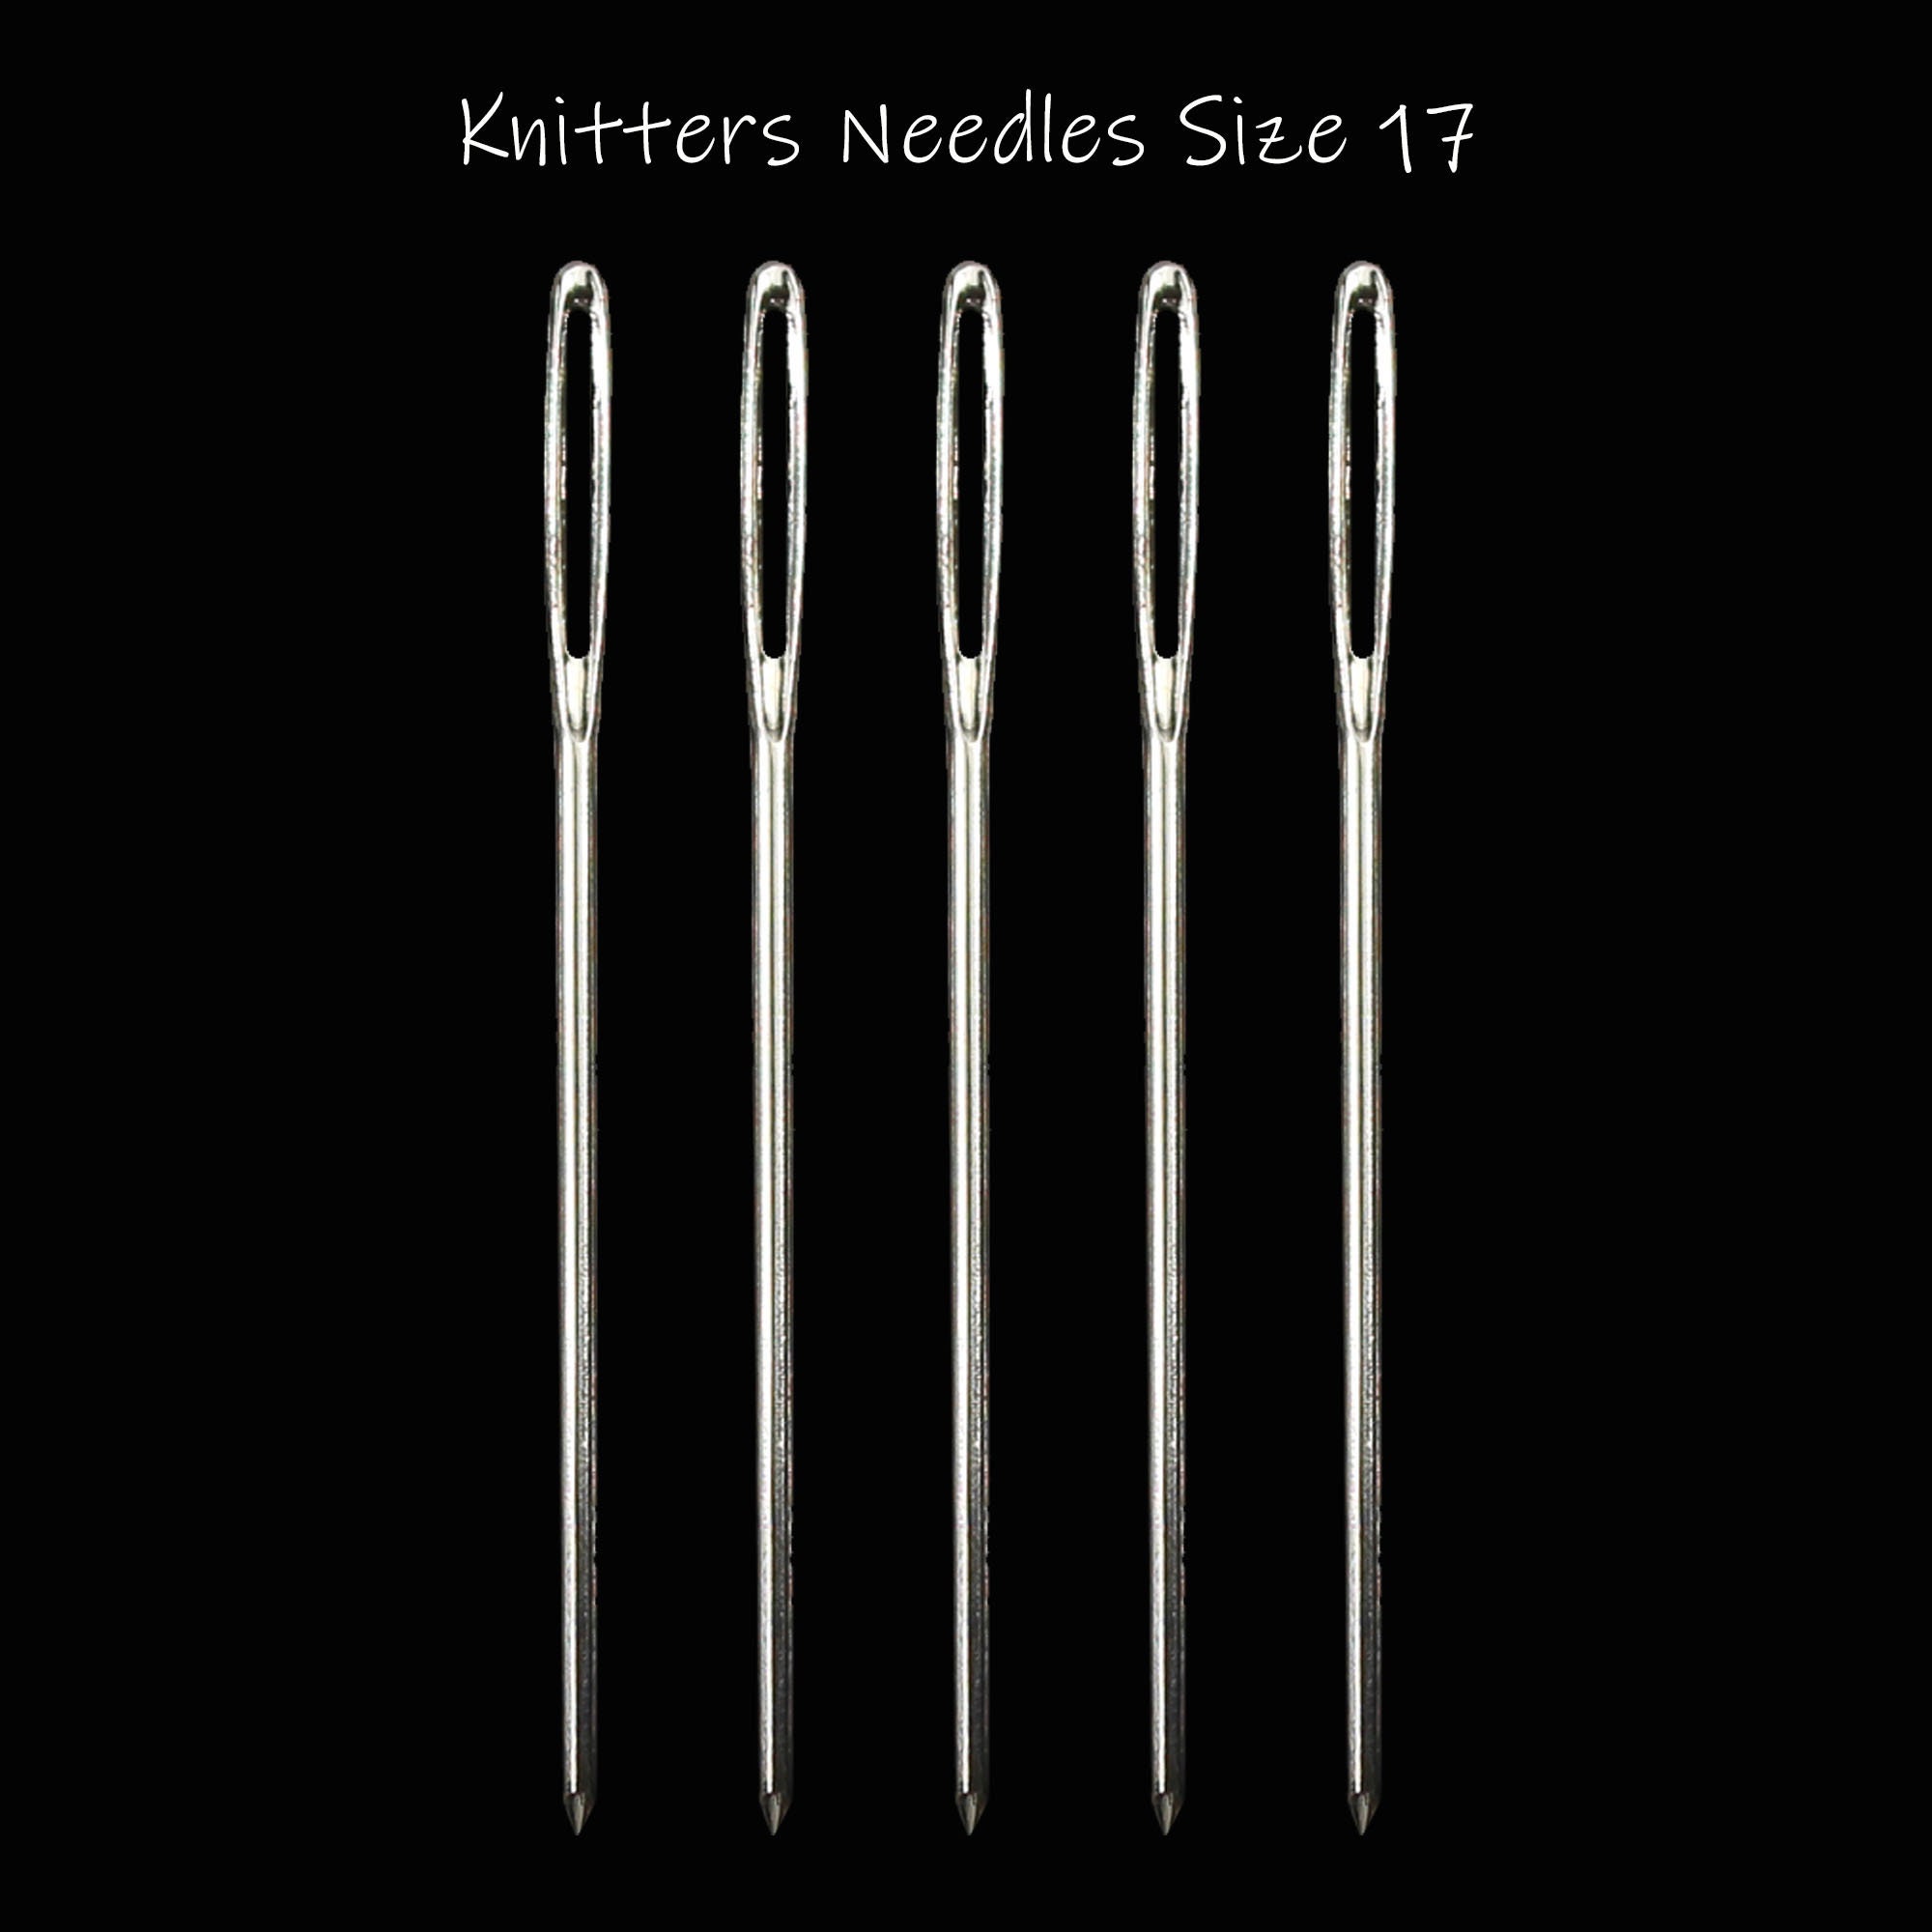 Large-Eye Blunt Needles, Stainless Steel Yarn Knitting Needles, Sewing  Needles, Crafting Knitting Weaving Stringing Needles,Perfect for Finishing  Off Crochet Projects 